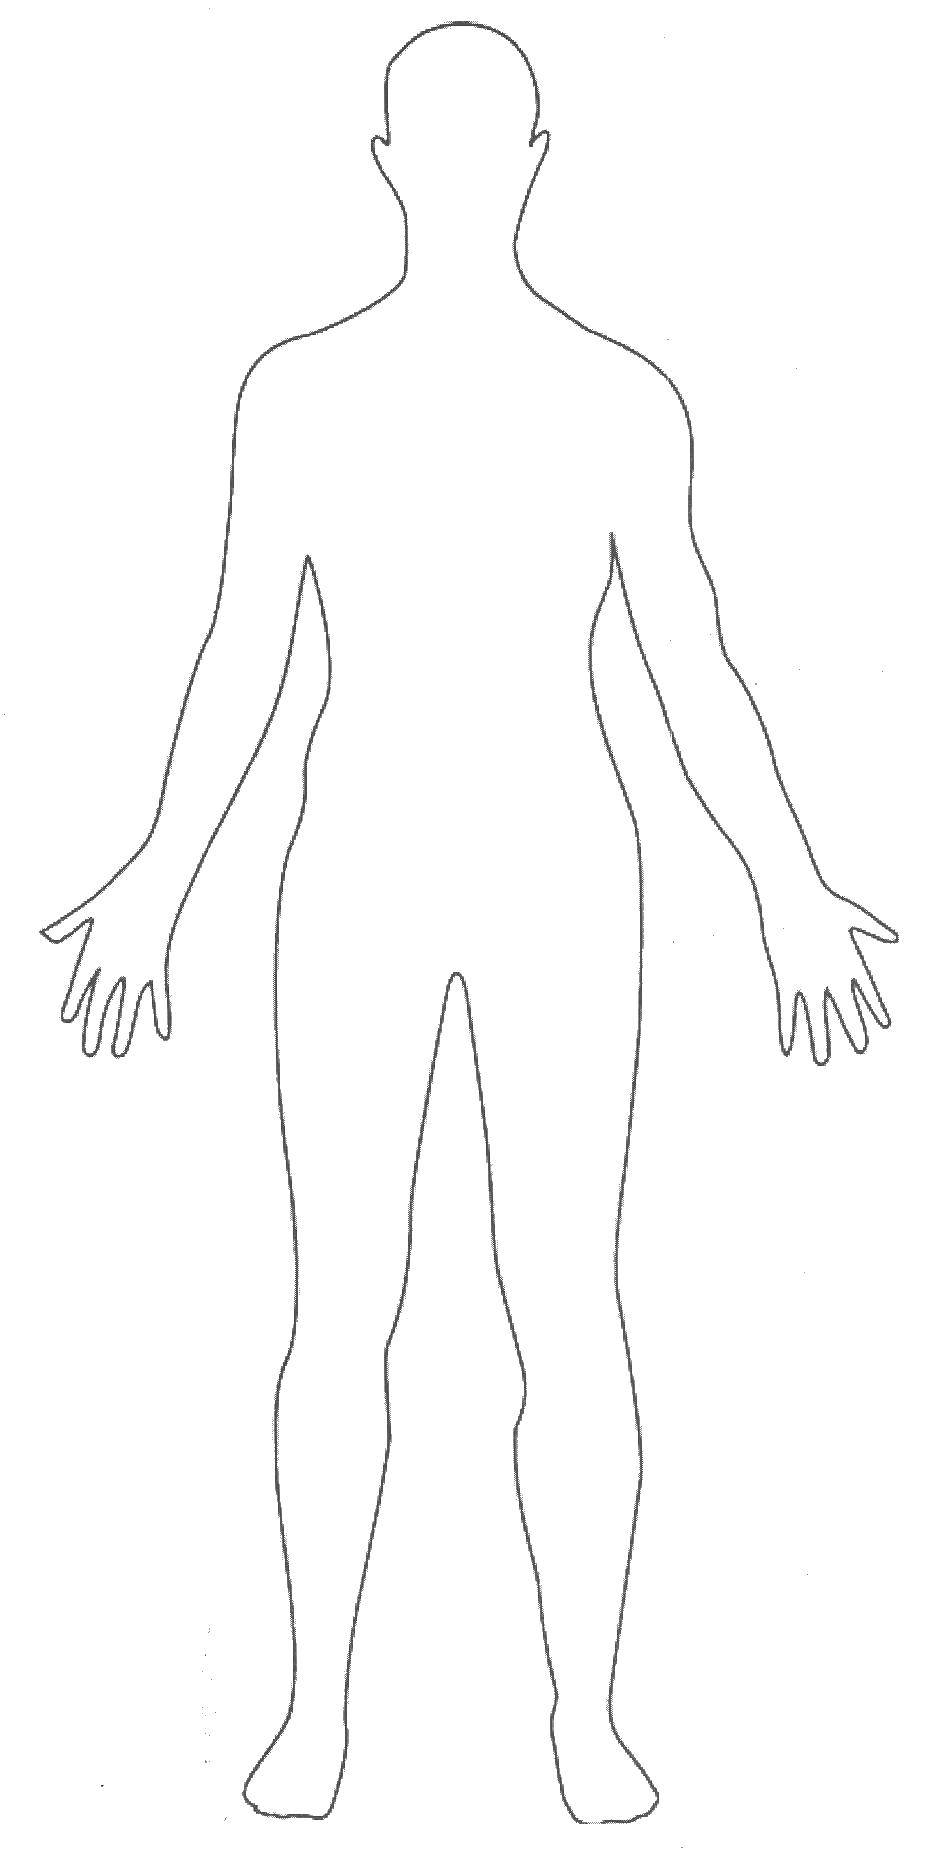 Coloring The contours of a person to cut. Category The contours of a person to cut. Tags:  Outline, people, etc.